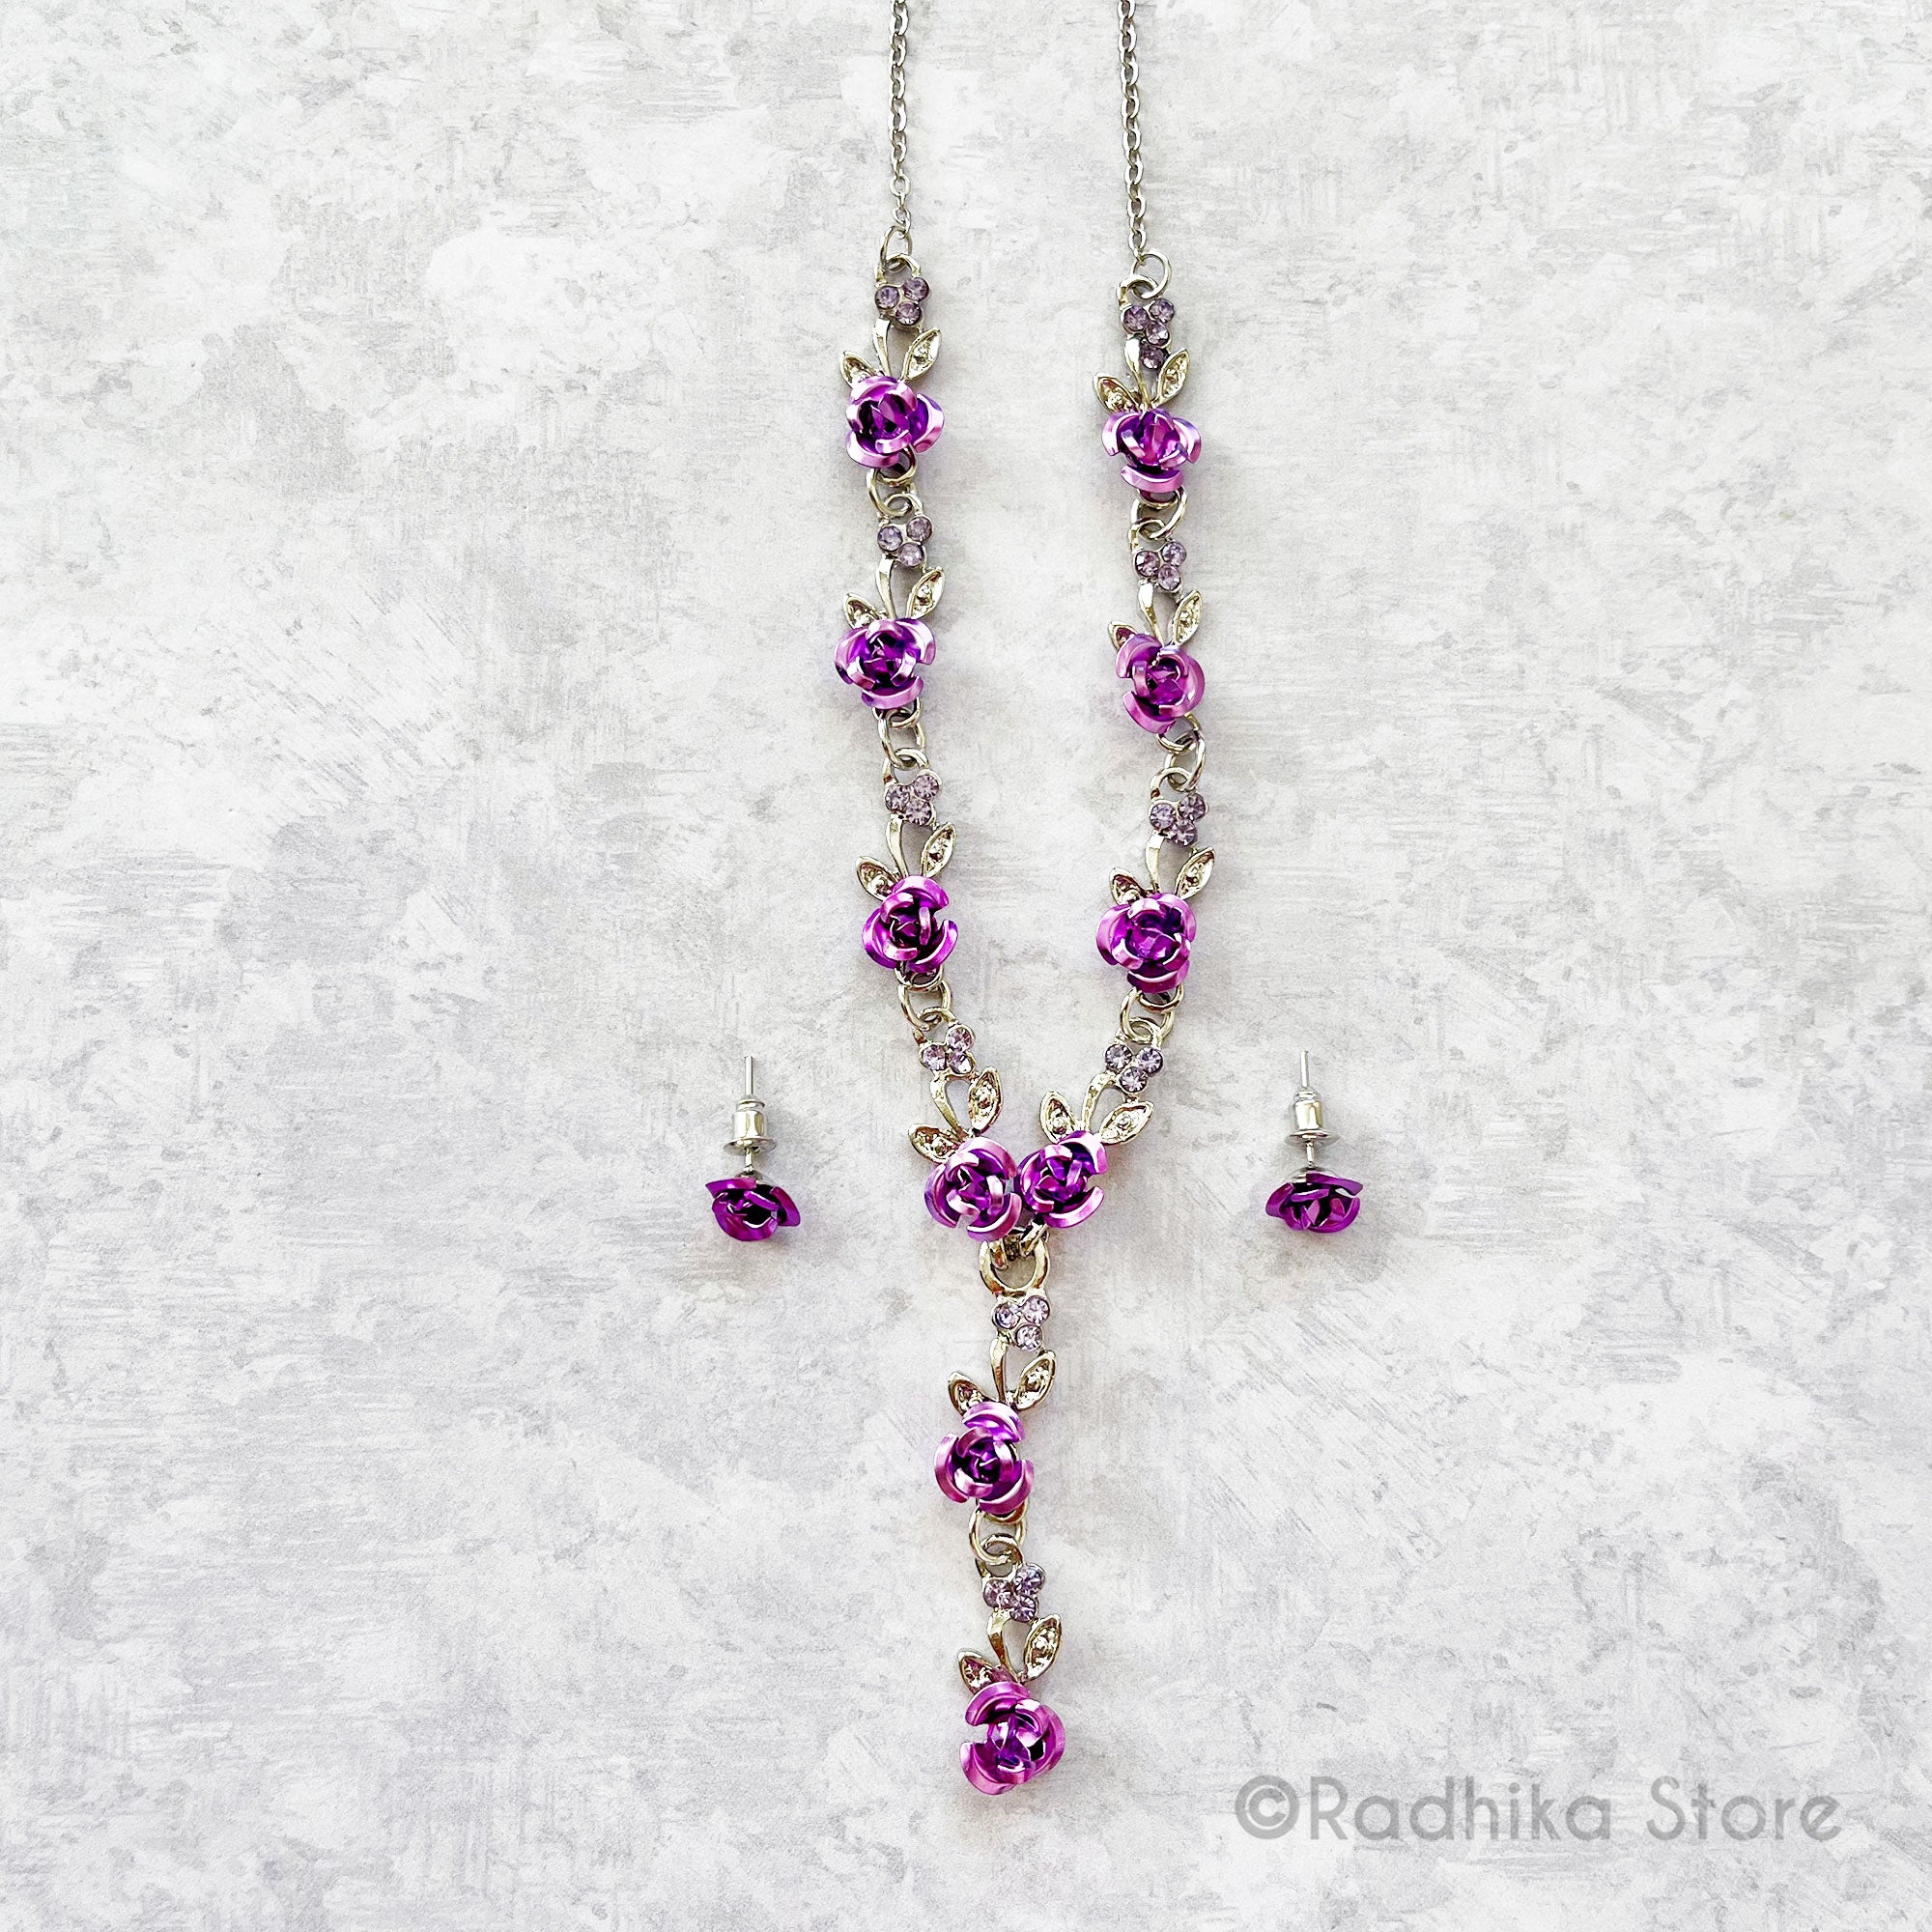 Stunning Crystal Purple Necklace Set In Purple, Pink, And Blue For Weddings  Necklace And Earrings Included Bridal Accessories T301471 From  Truelove1990, $47.04 | DHgate.Com